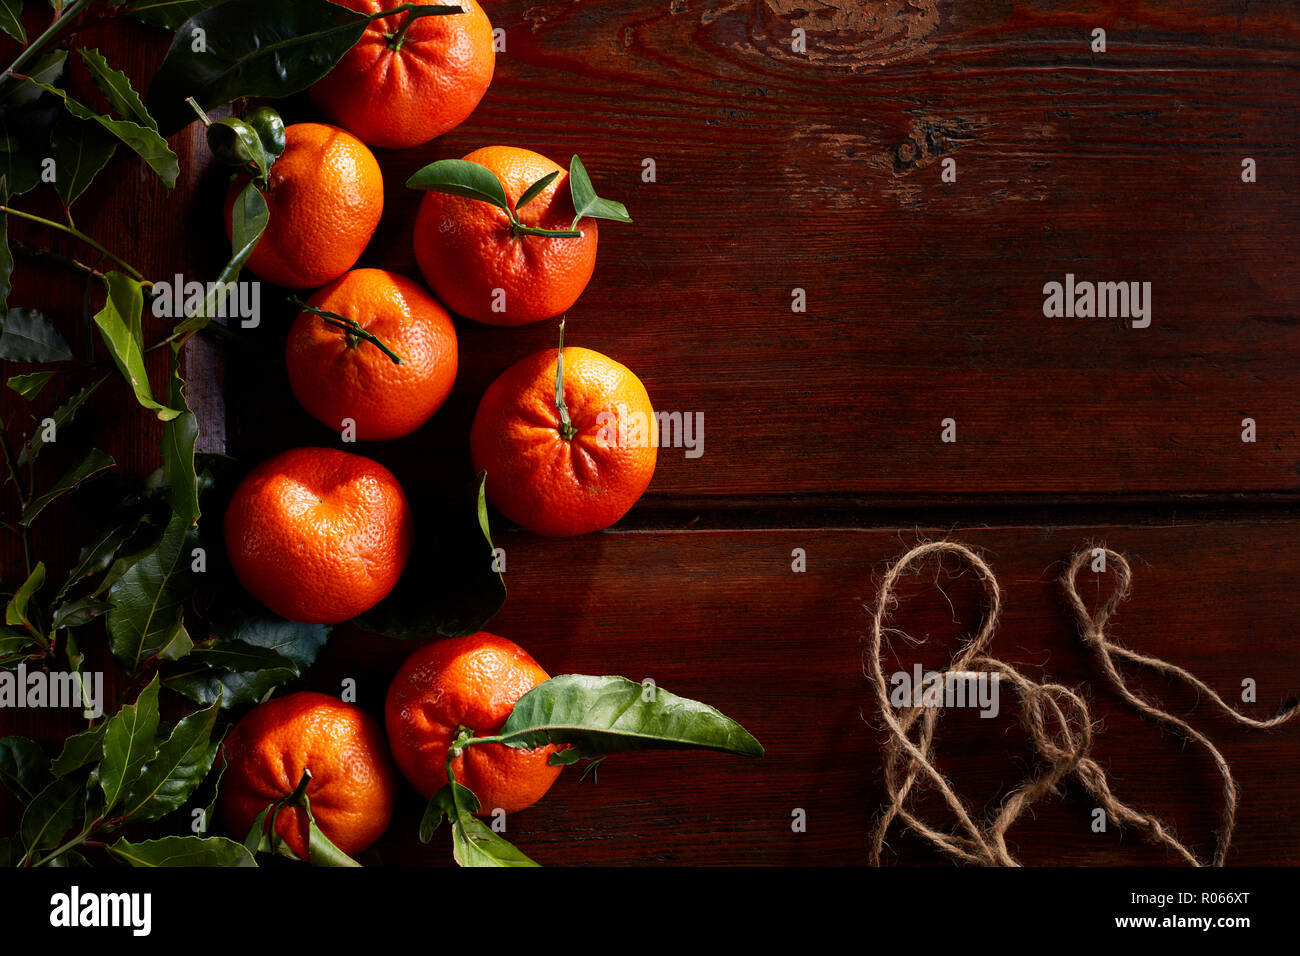 Clementines, used as an ingredient Stock Photo